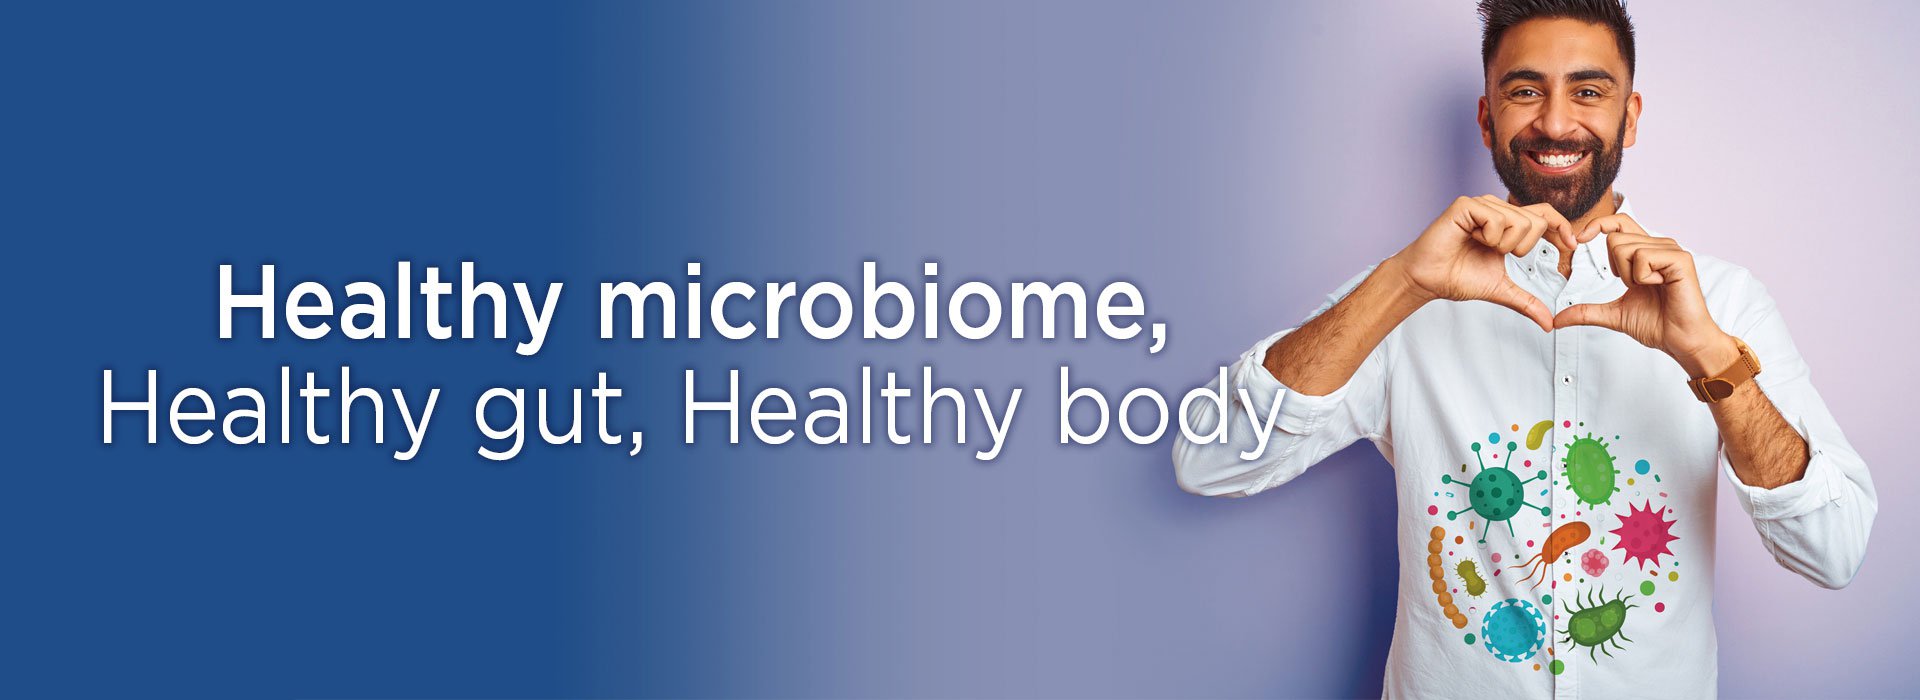 New Image International:Healthy microbiome, healthy gut, healthy body